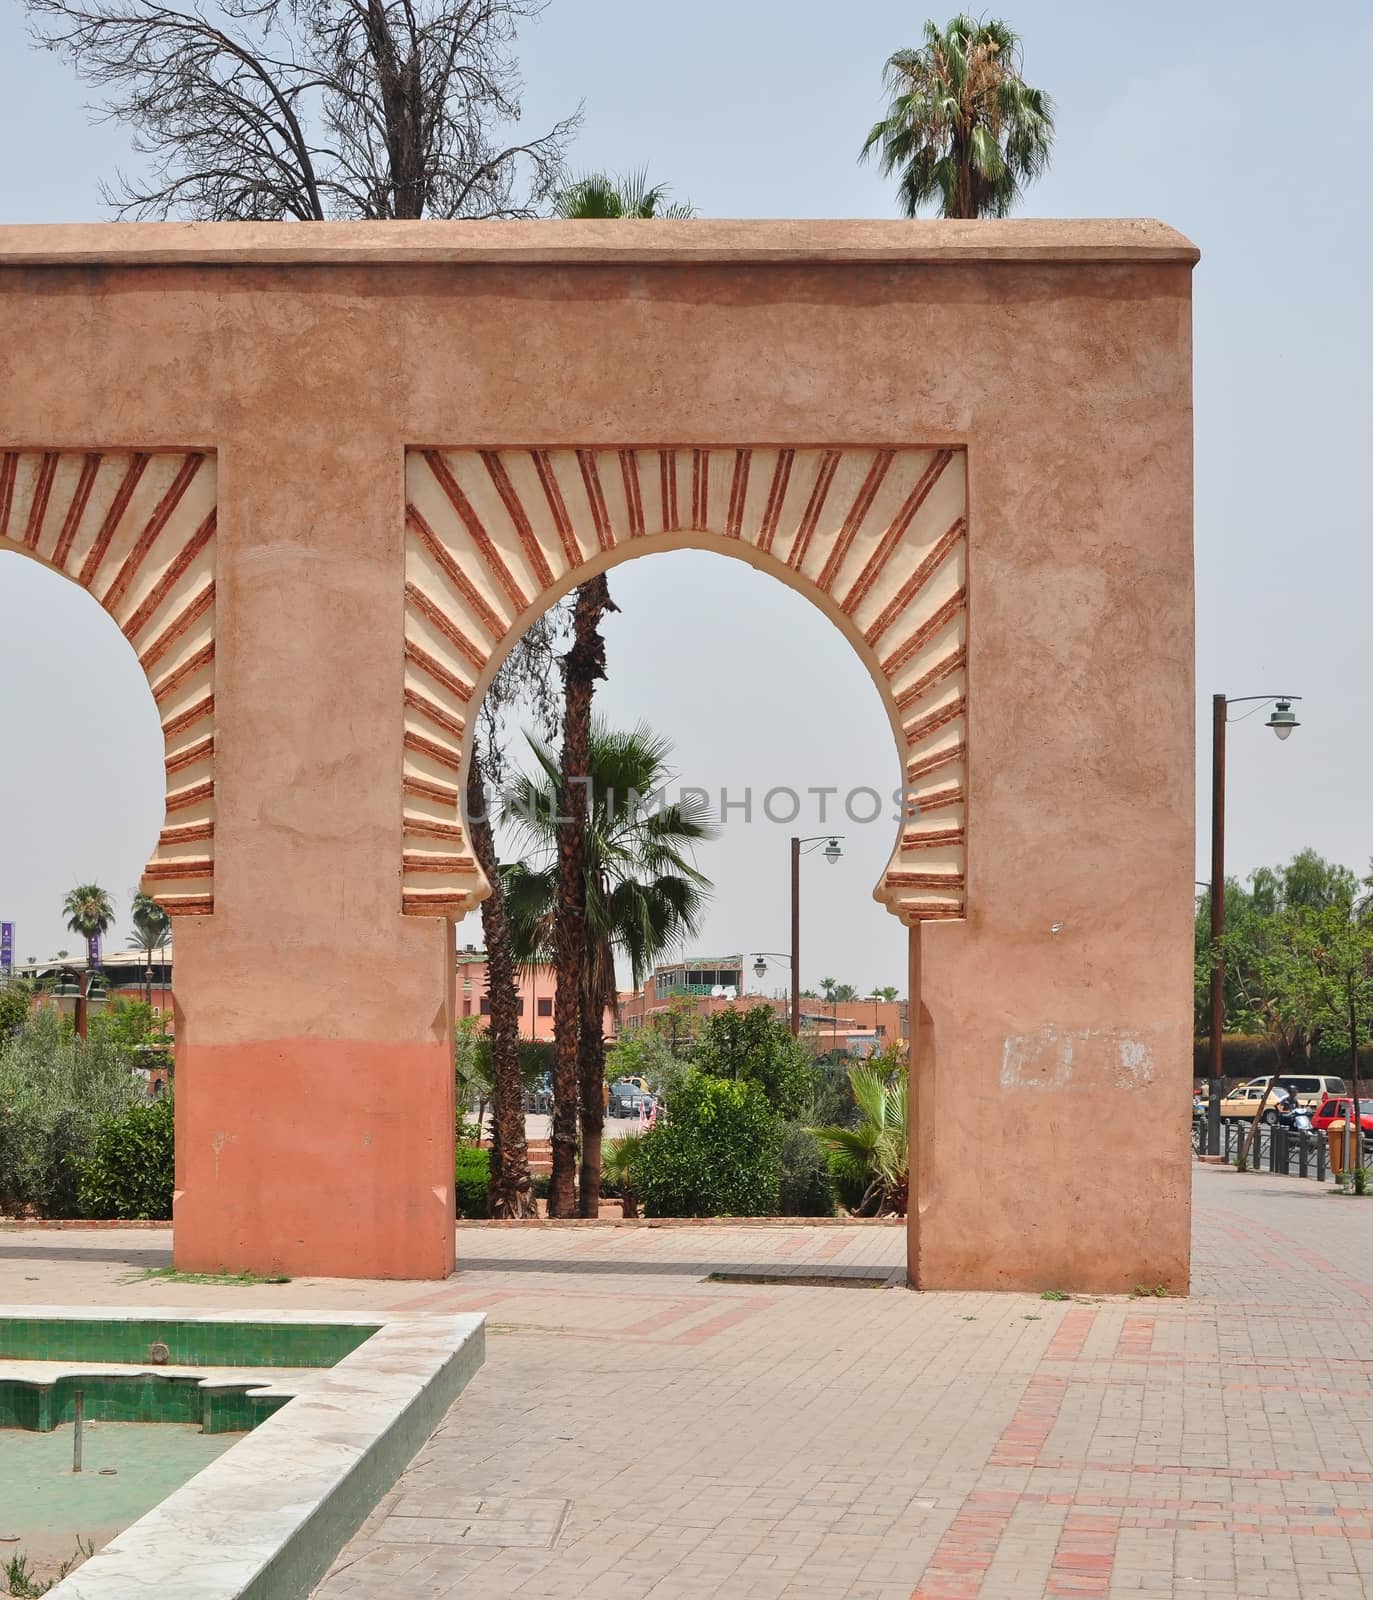 Koutoubia Mosque archway by tony4urban